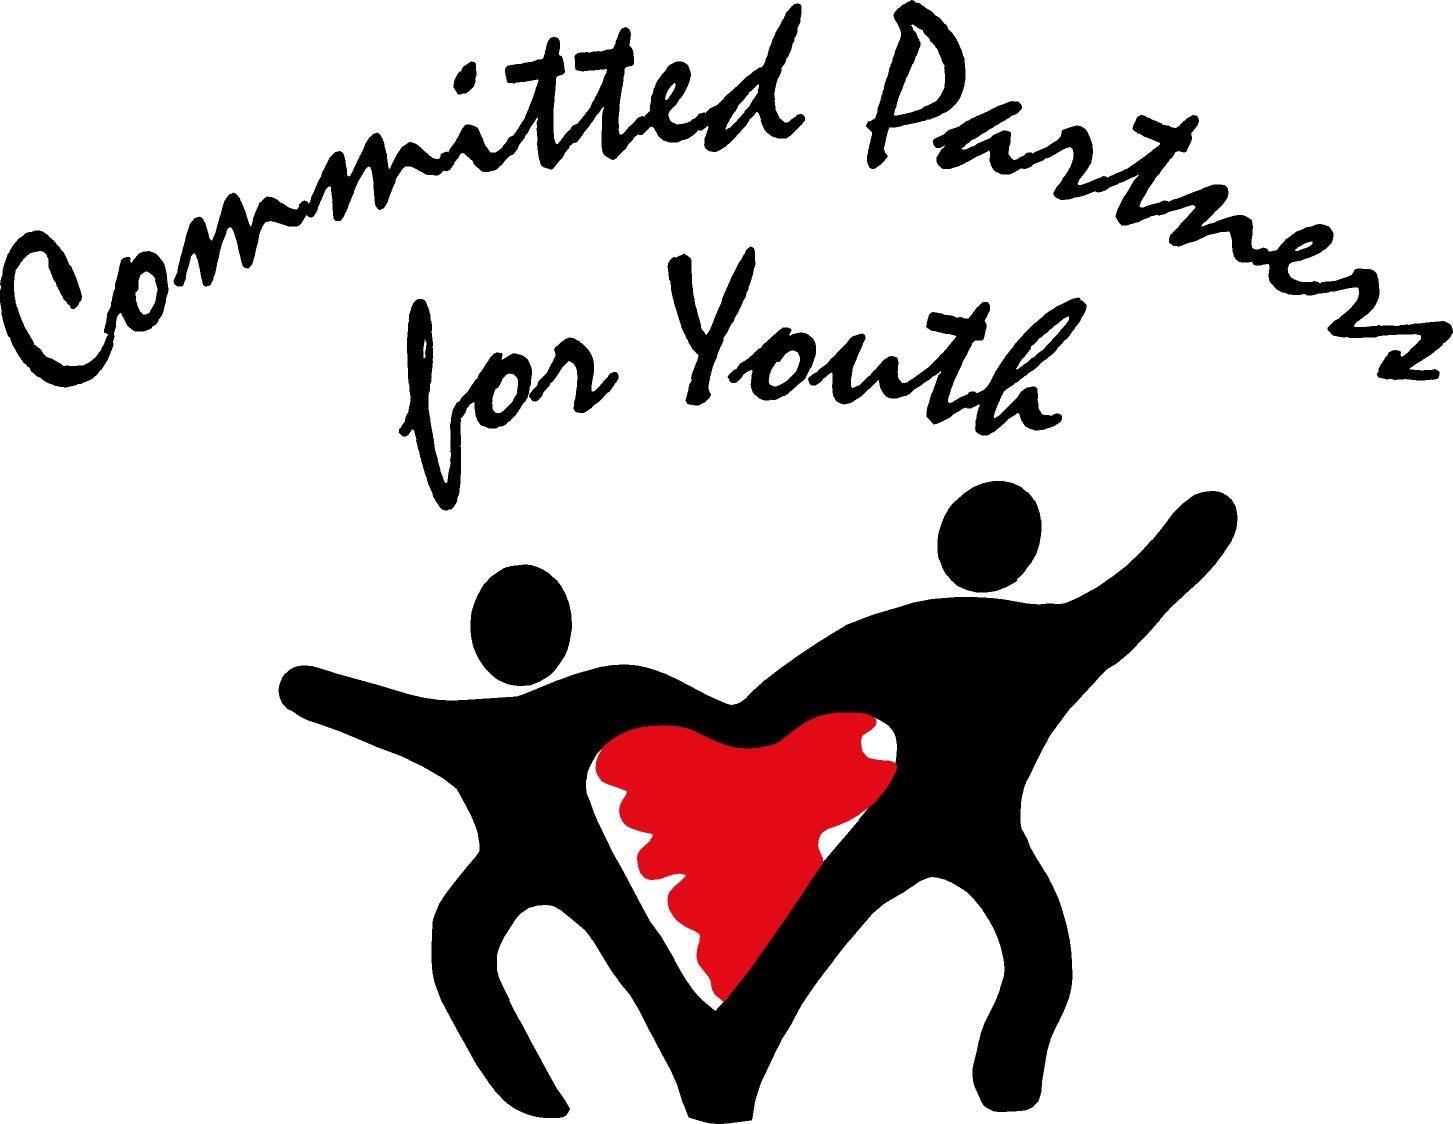 Image of Committed Partners For Youth